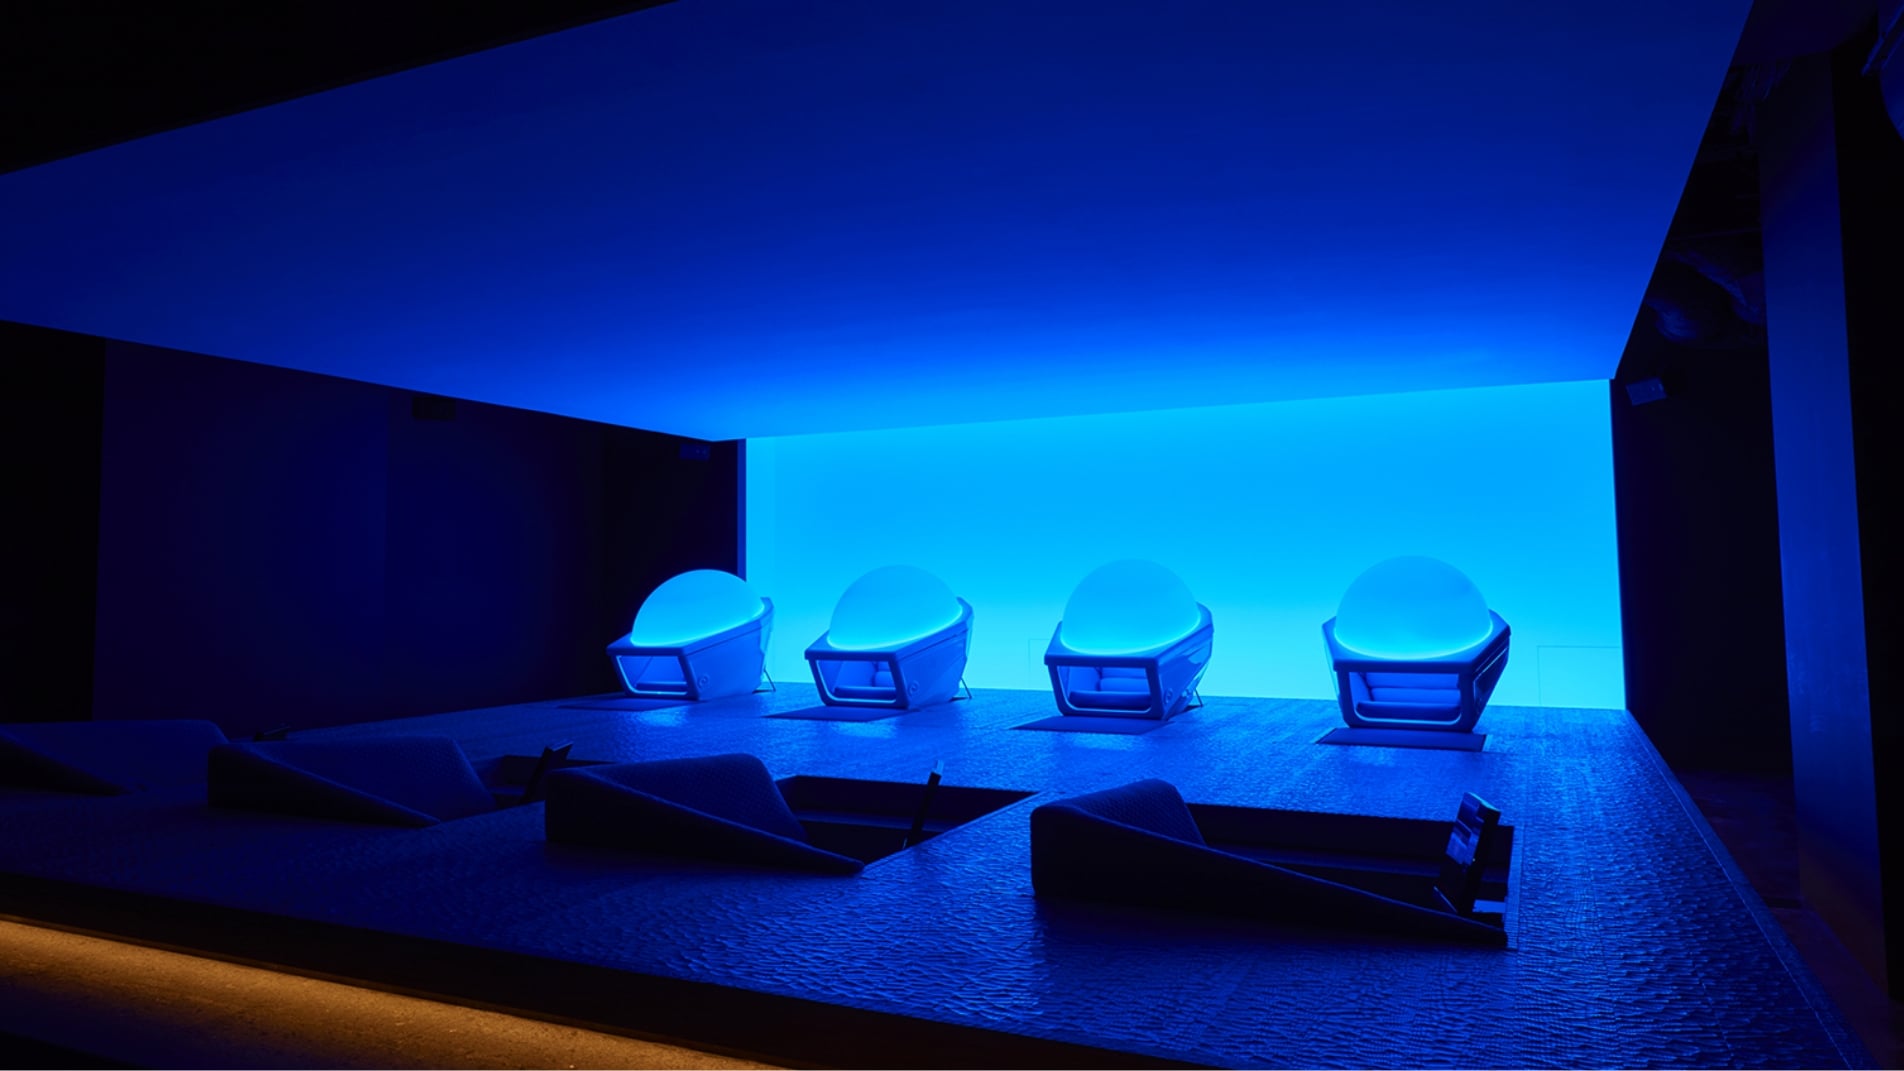 The concept "Awaken Your Beauty" on the basement floor; a program that stimulates the five senses and meditation pods offer you the "Inner Beauty Charge" experience